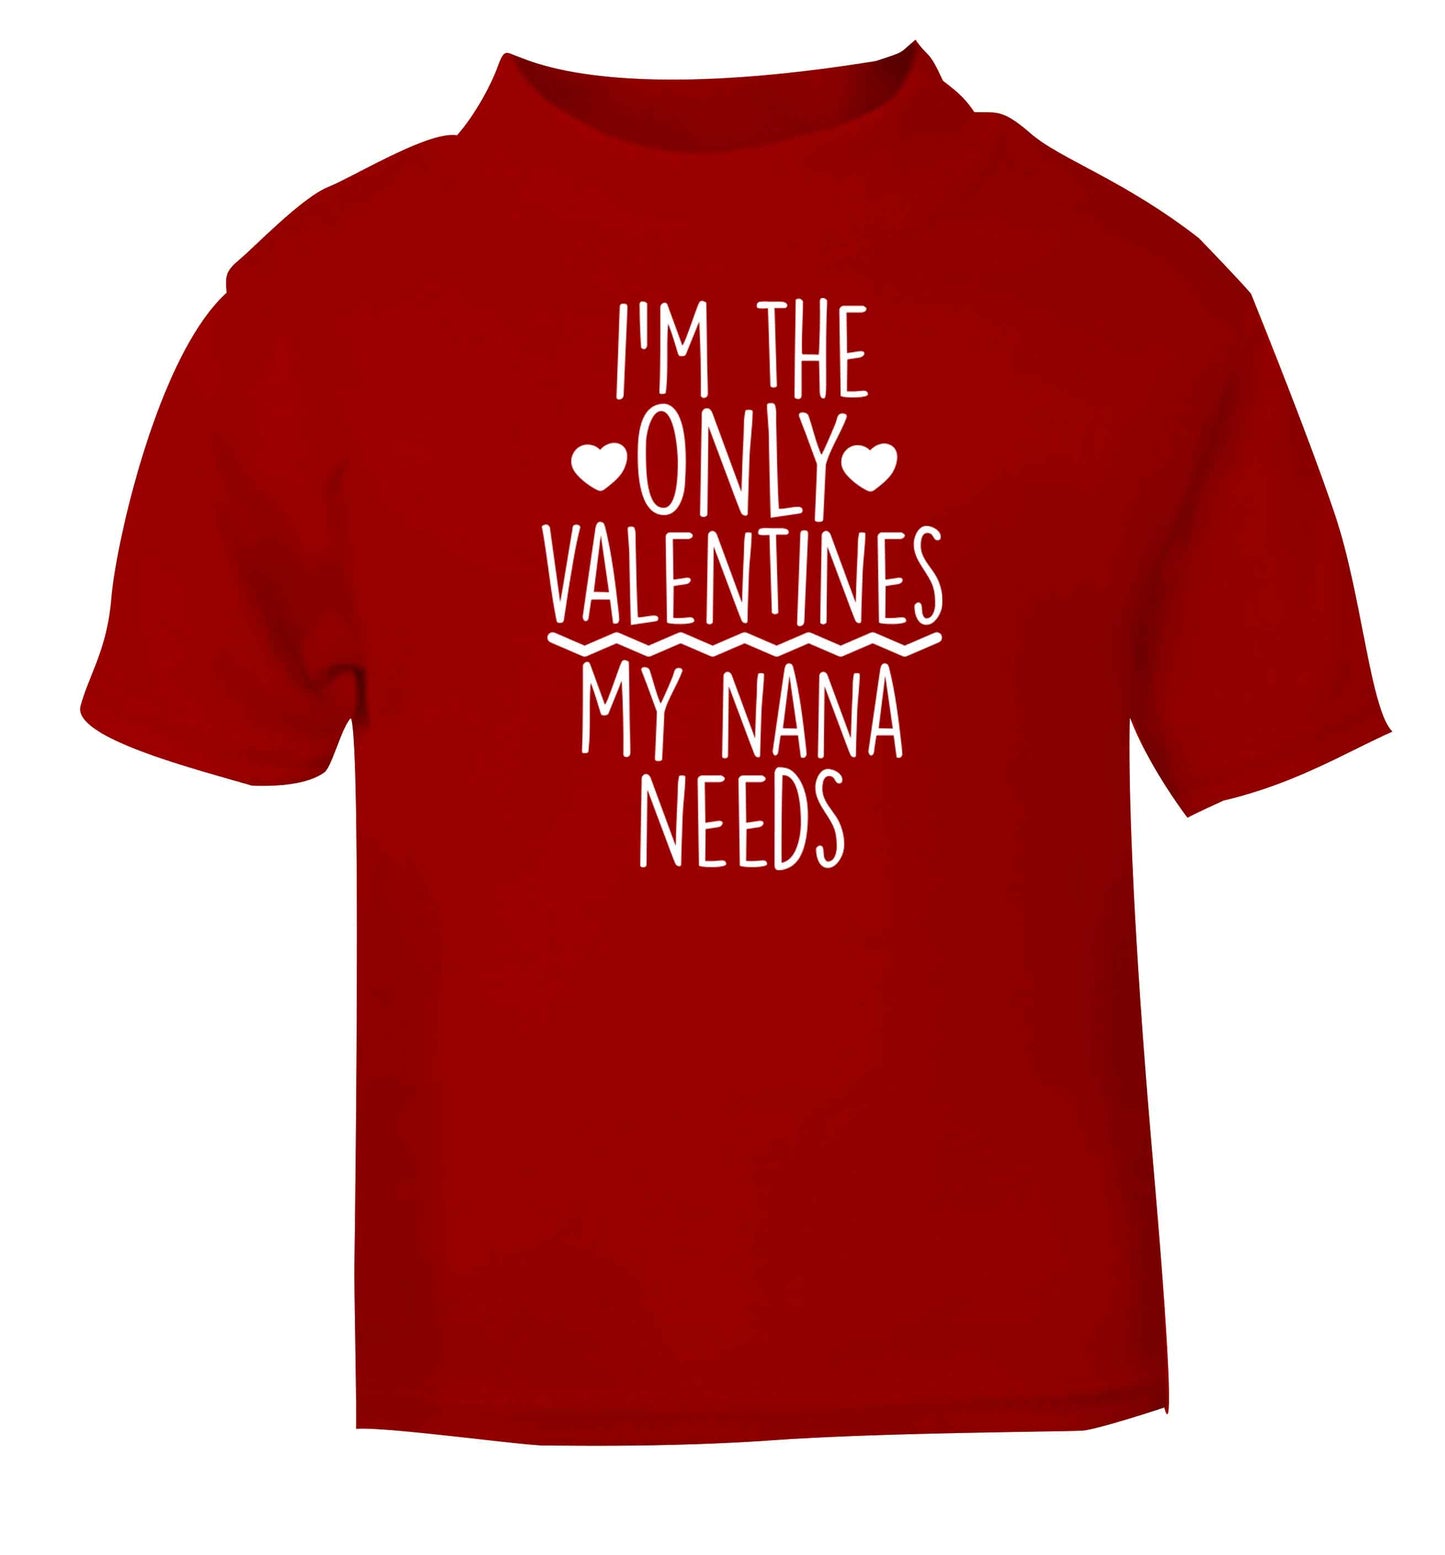 I'm the only valentines my nana needs red baby toddler Tshirt 2 Years